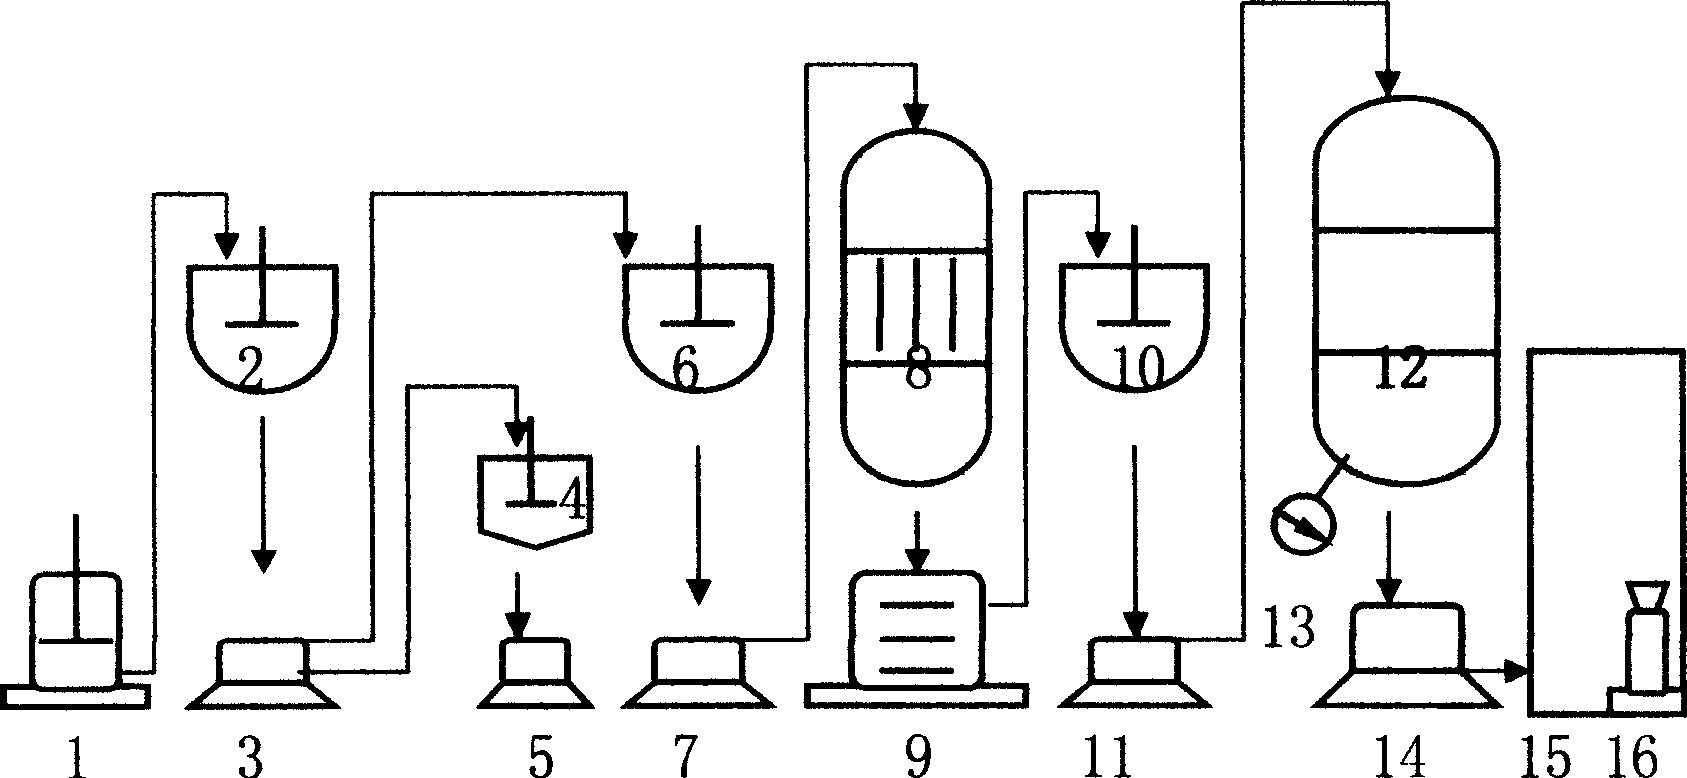 Method for coproduction of bleaching powder, active carbon, sodium chloride and sulphuric acid from waste gypsum plaster